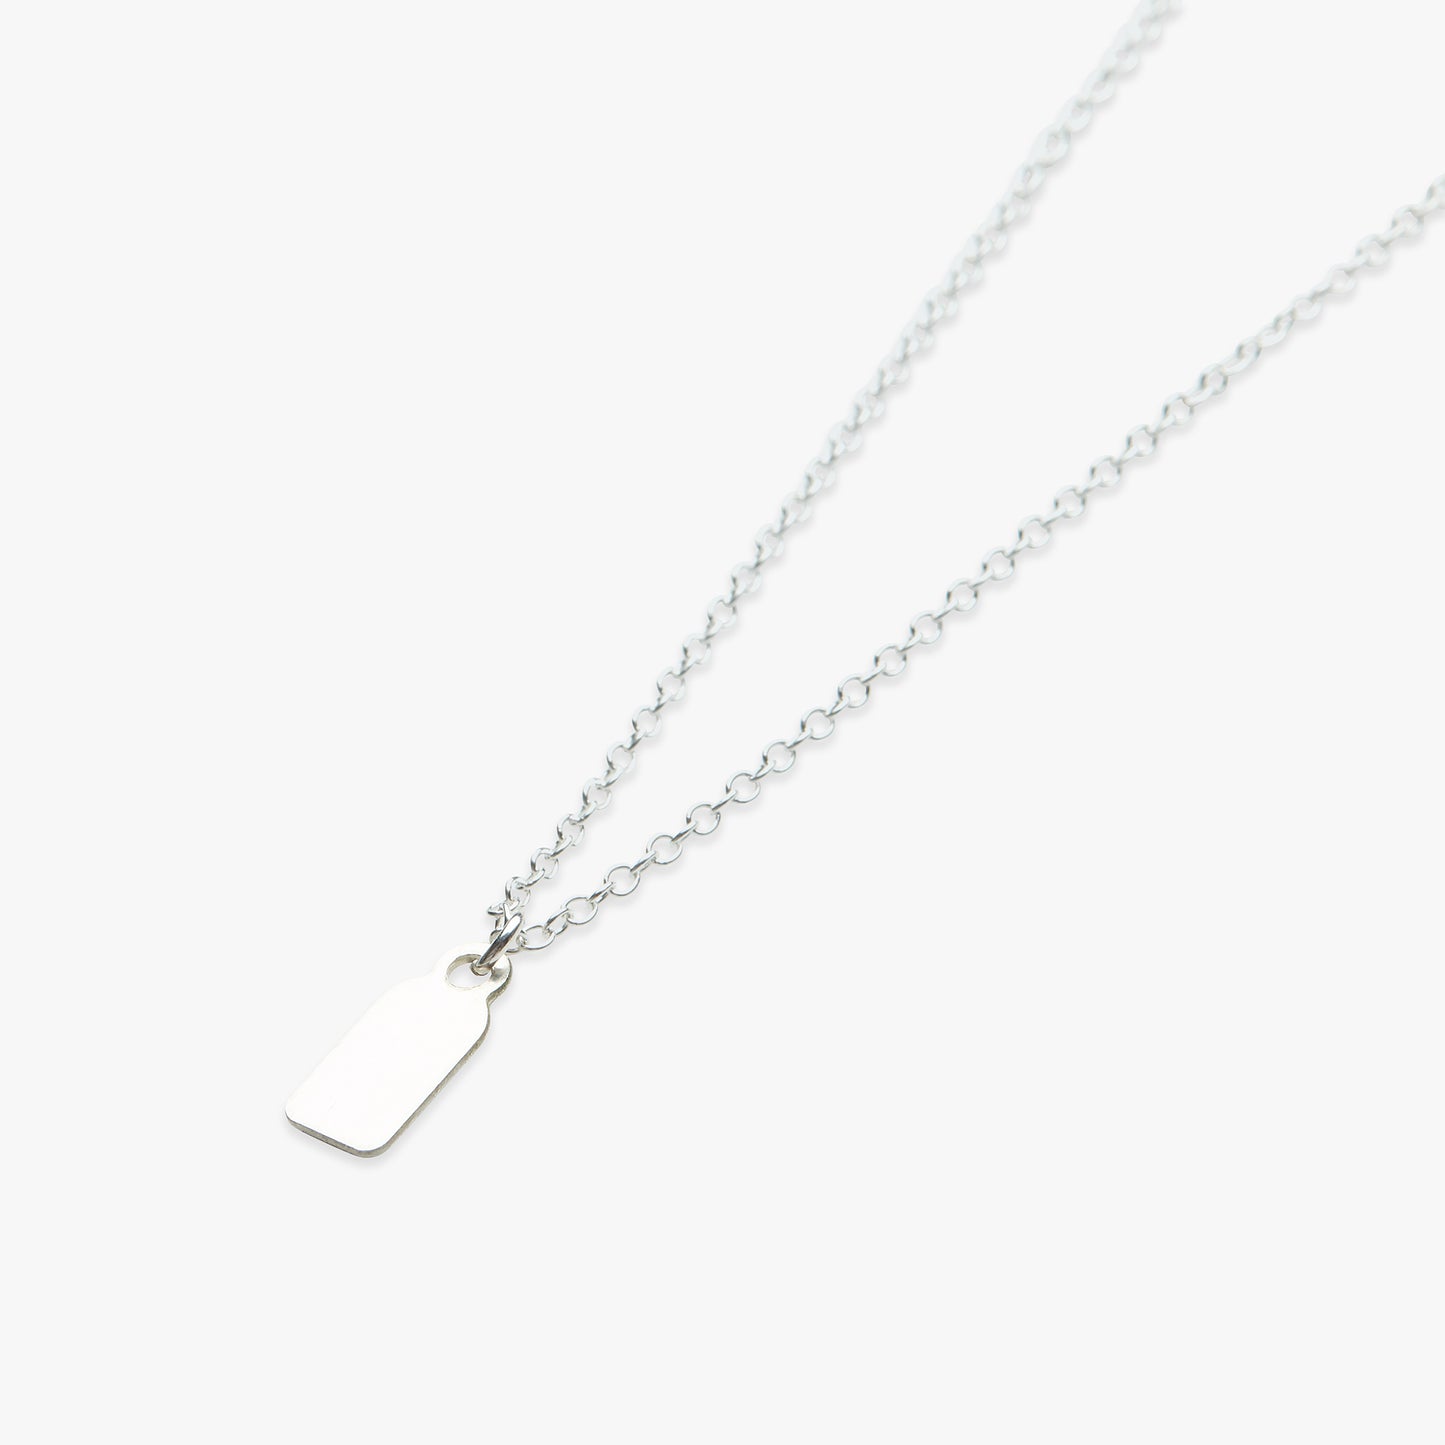 Label necklace silver